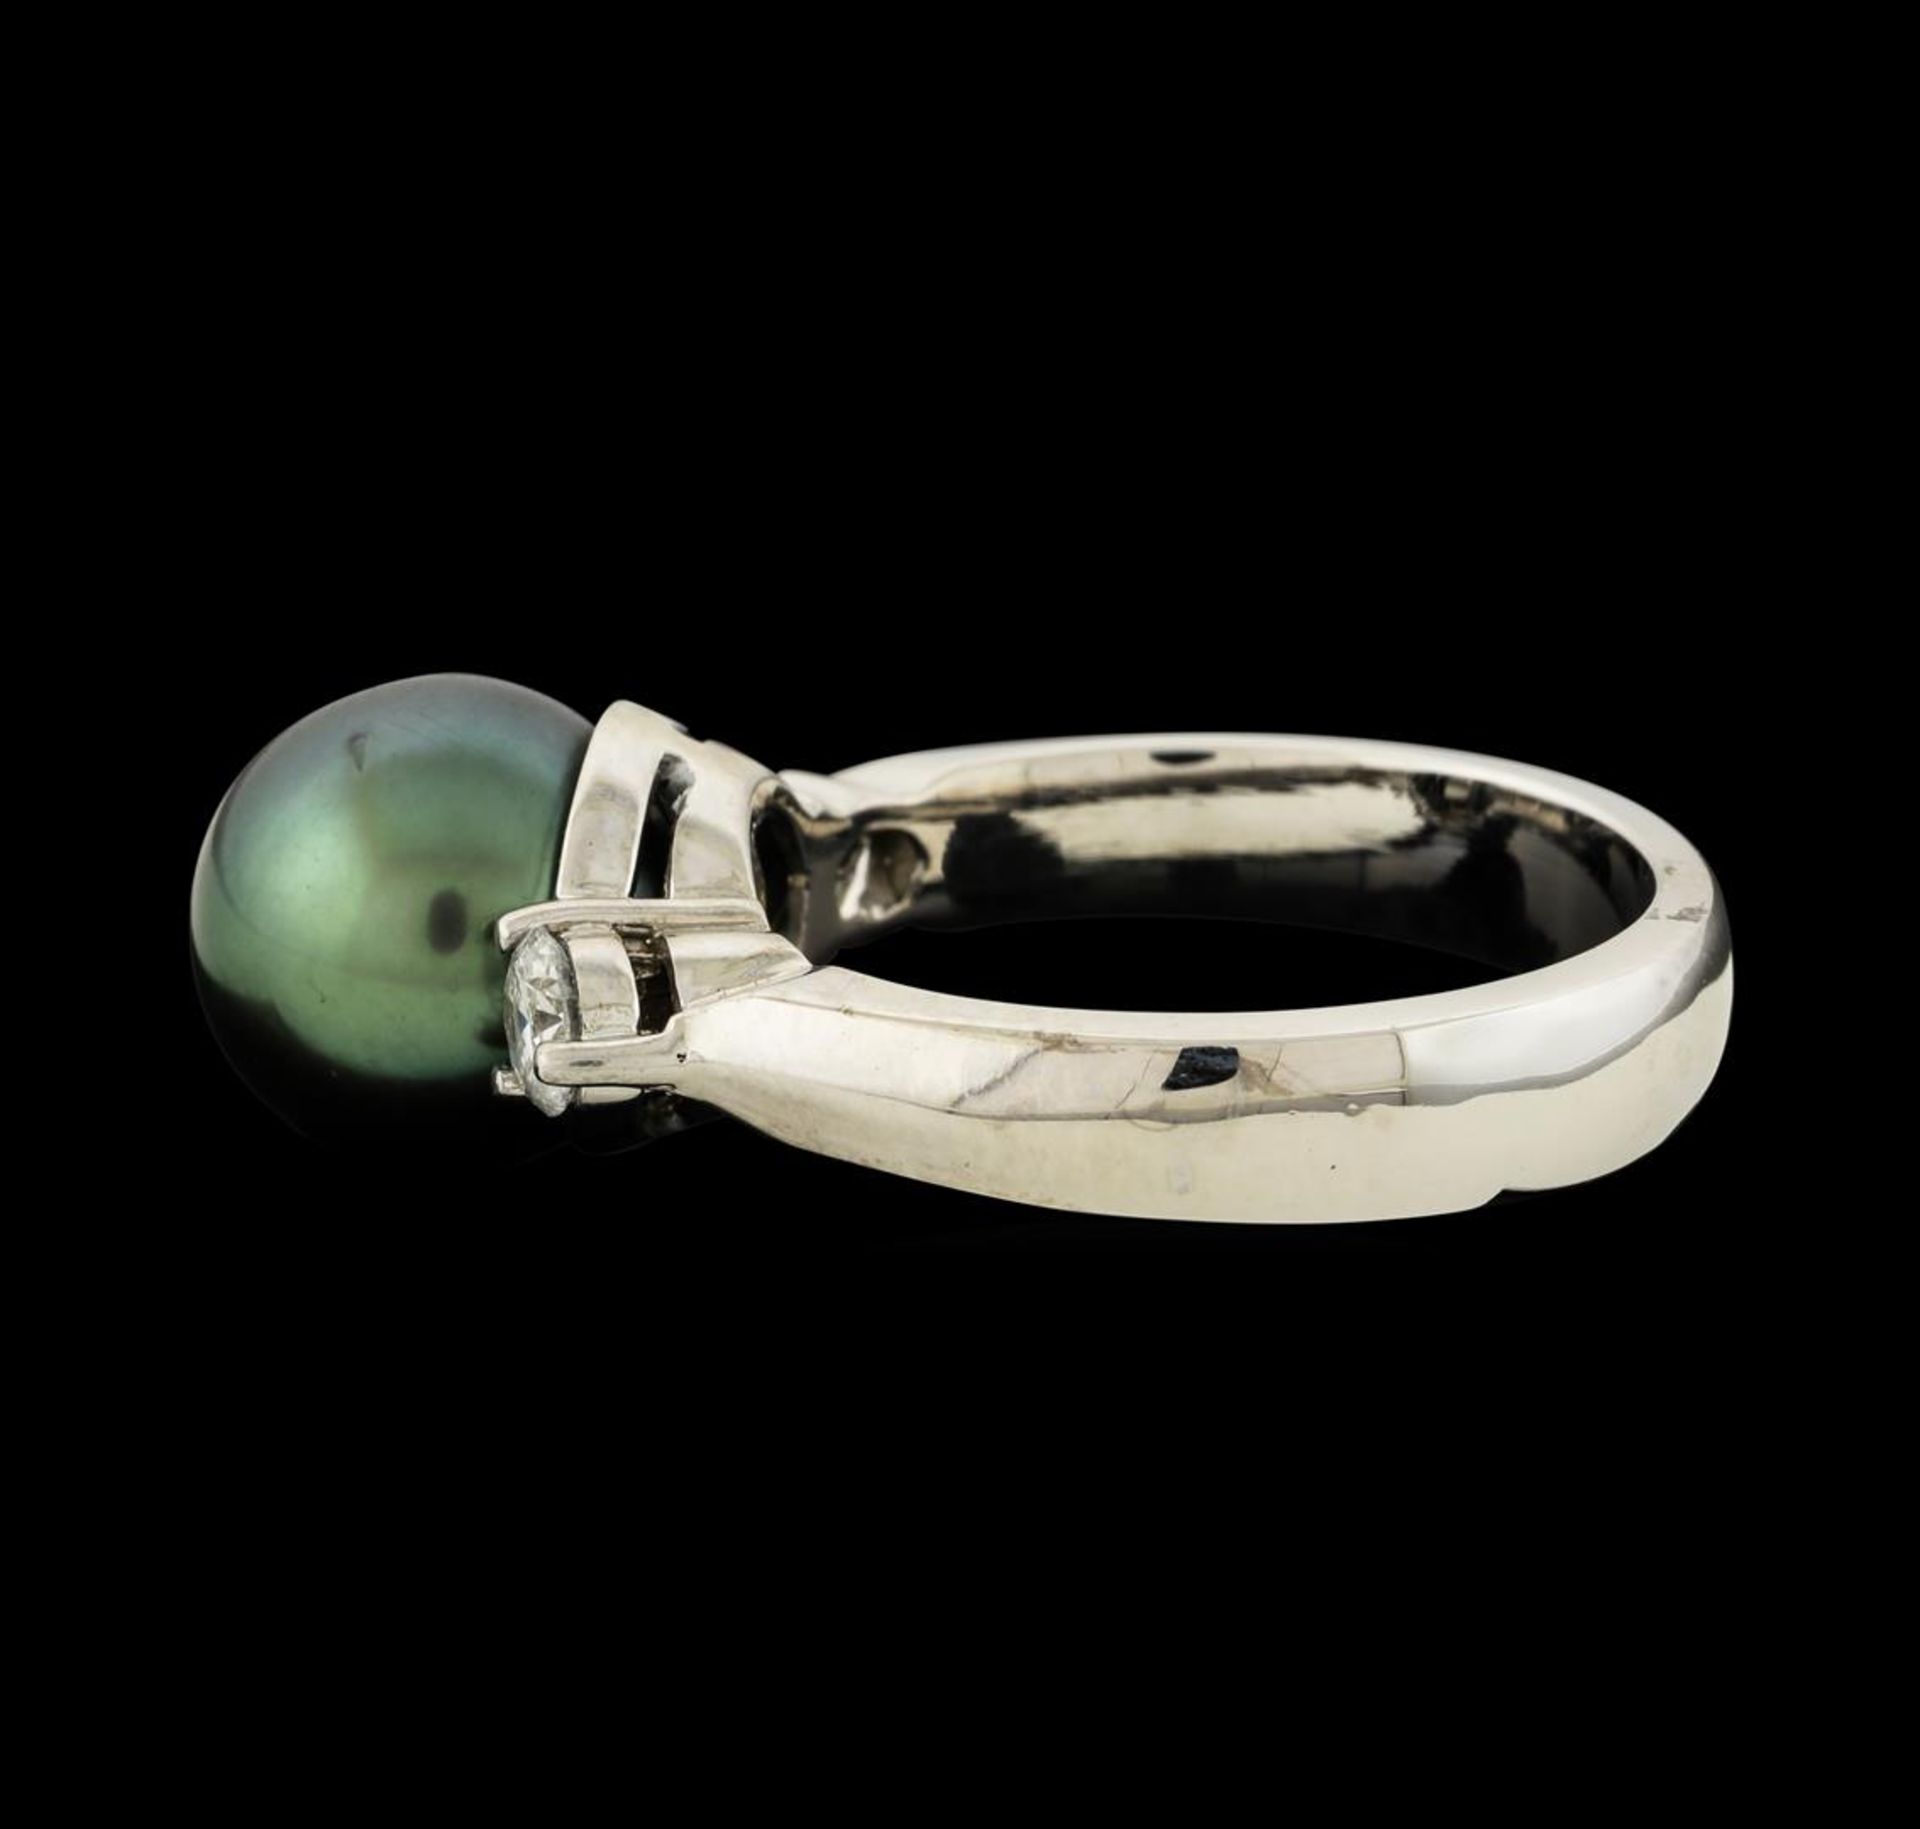 Pearl and Diamond Ring - 14KT White Gold - Image 3 of 4